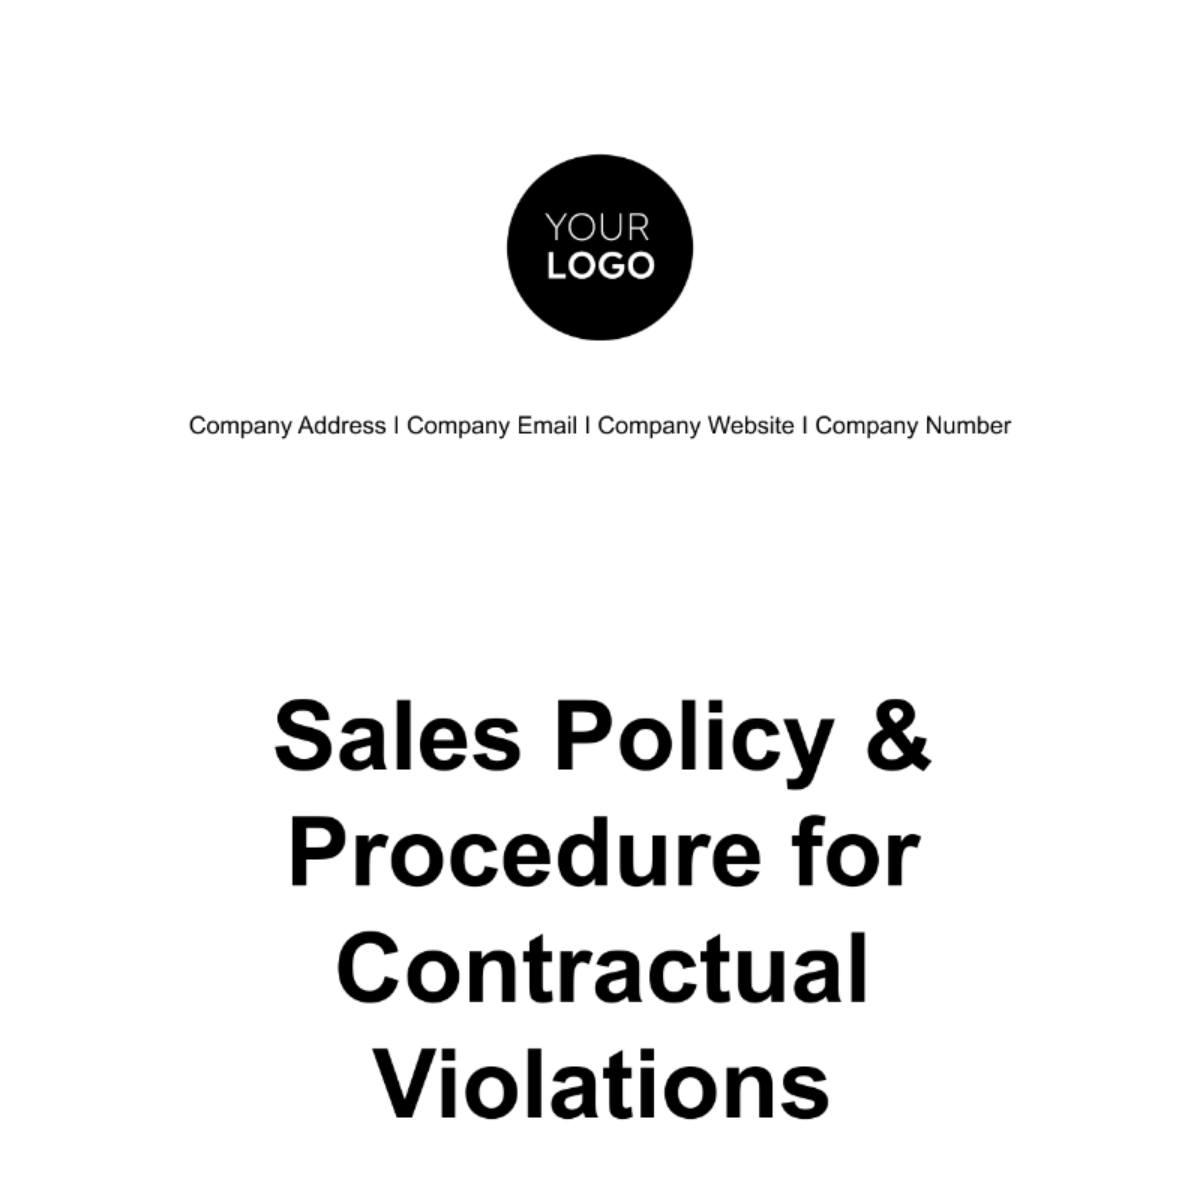 Sales Policy & Procedure for Contractual Violations Template